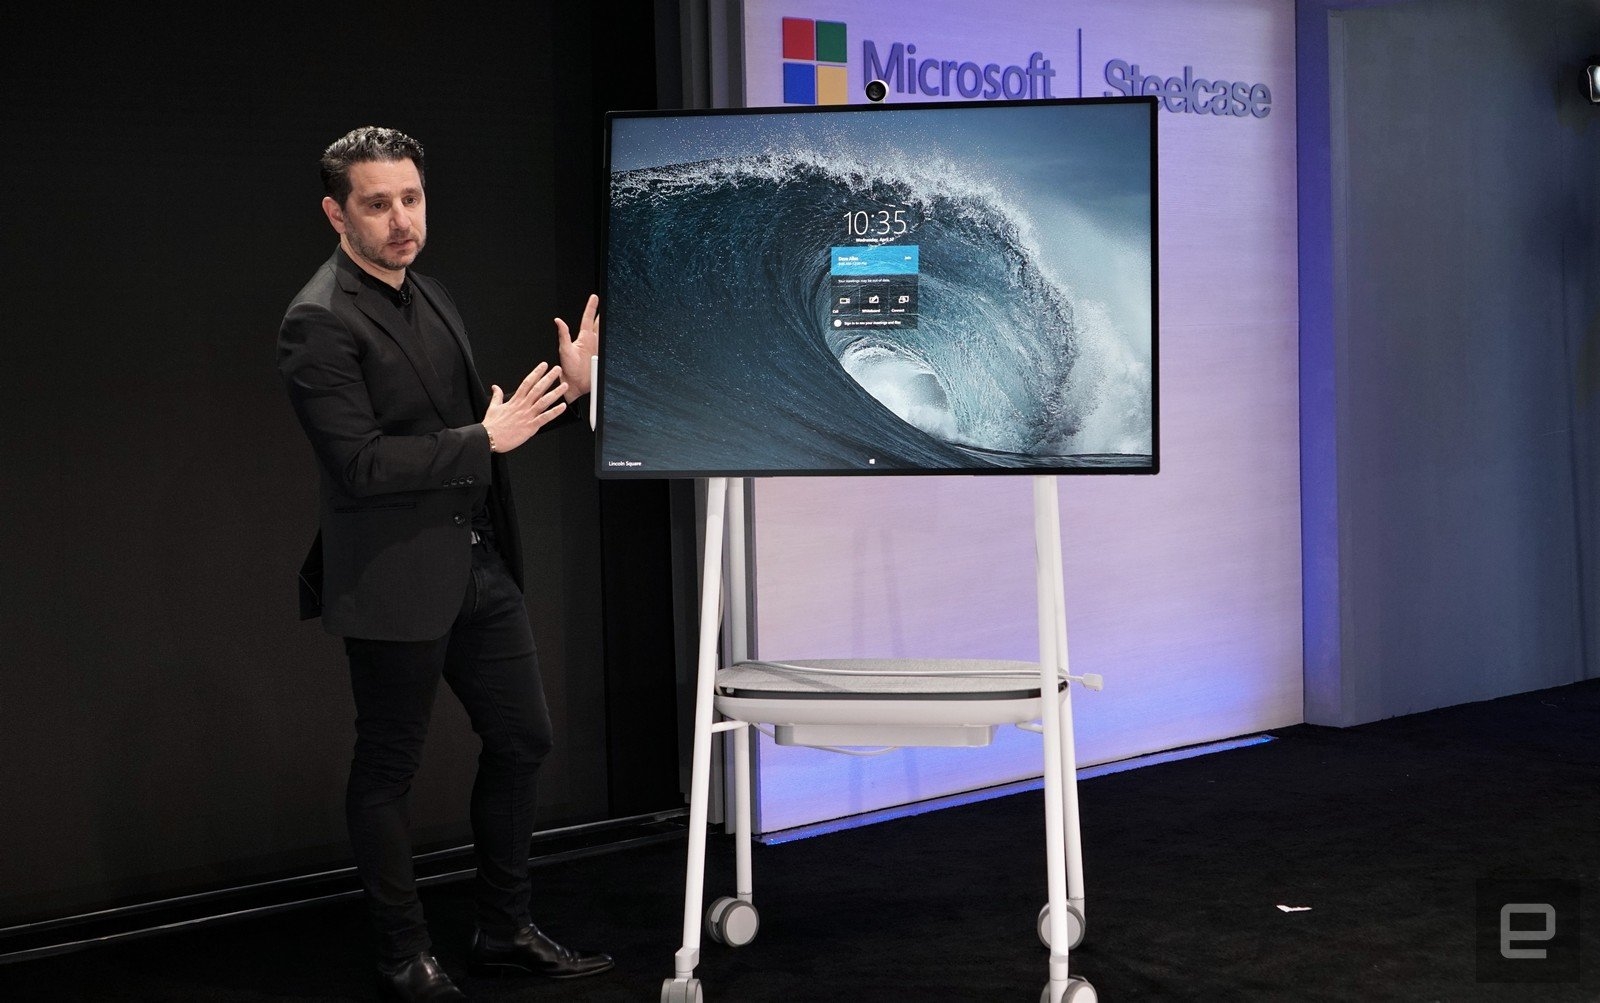 Microsoft unveils an 85-inch Surface Hub 2S collaborative display | DeviceDaily.com